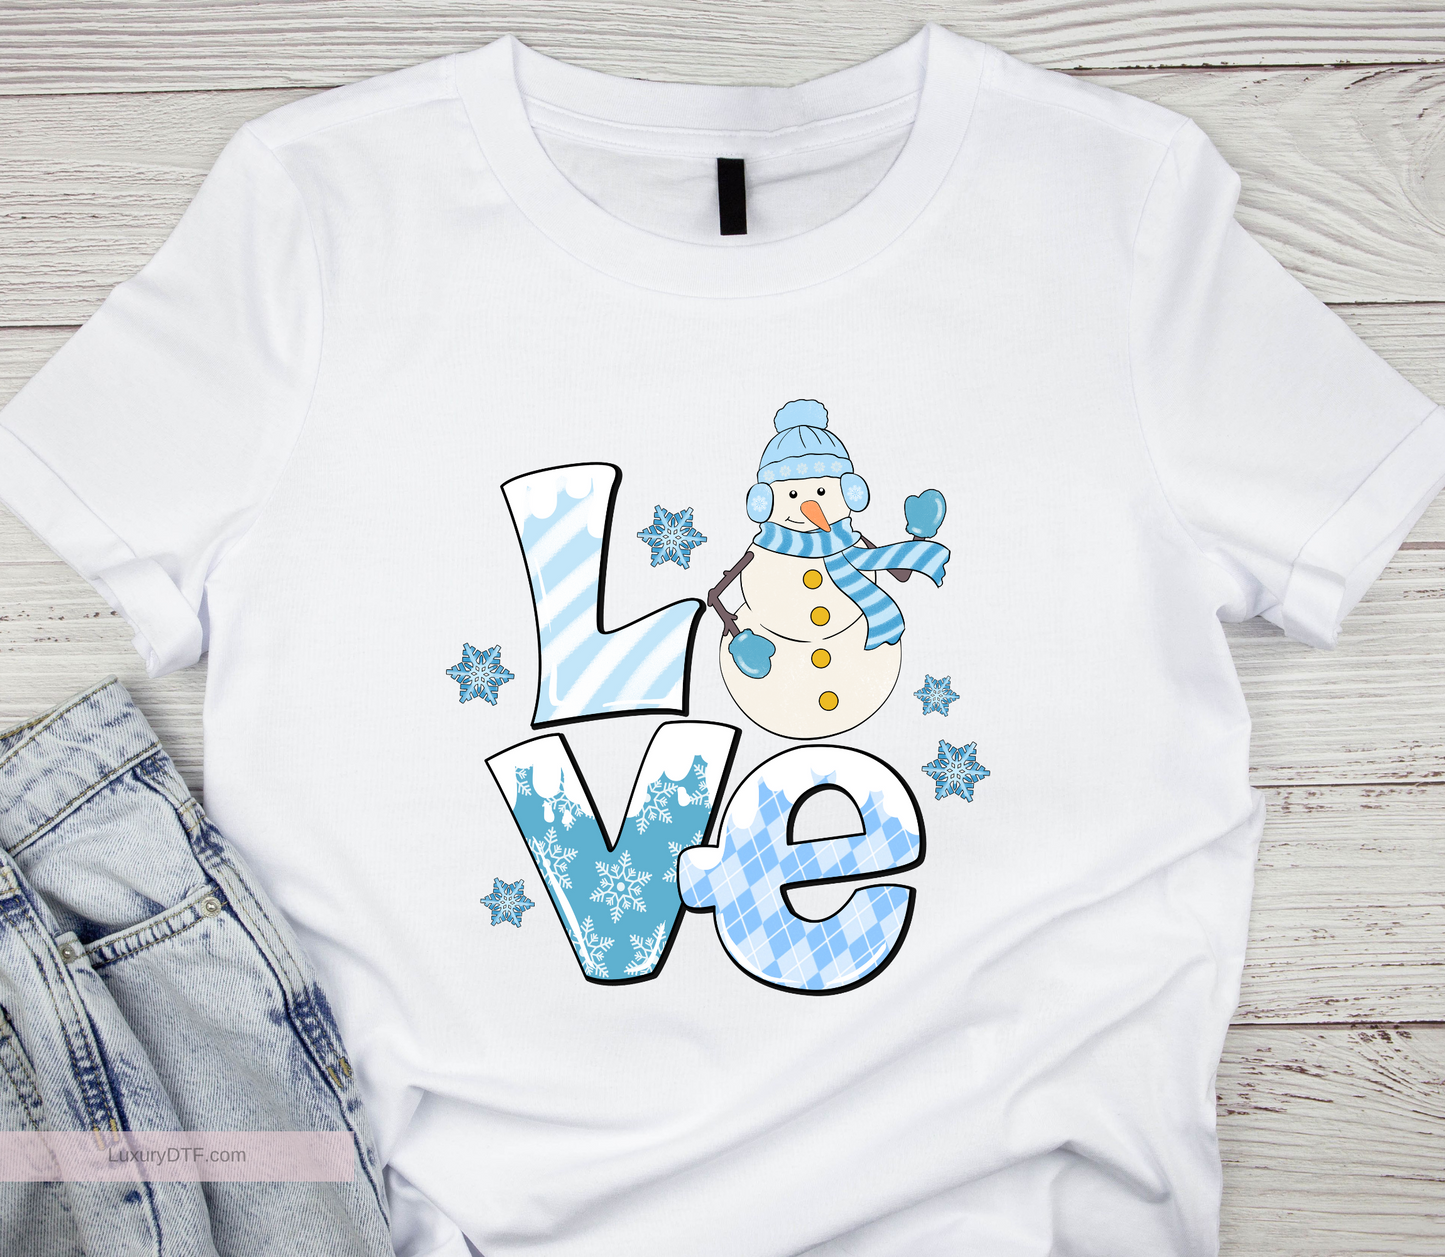 Winter Love Snowman DTF Transfer on a white shirt | easy to apply heat transfer | luxurydtf.com